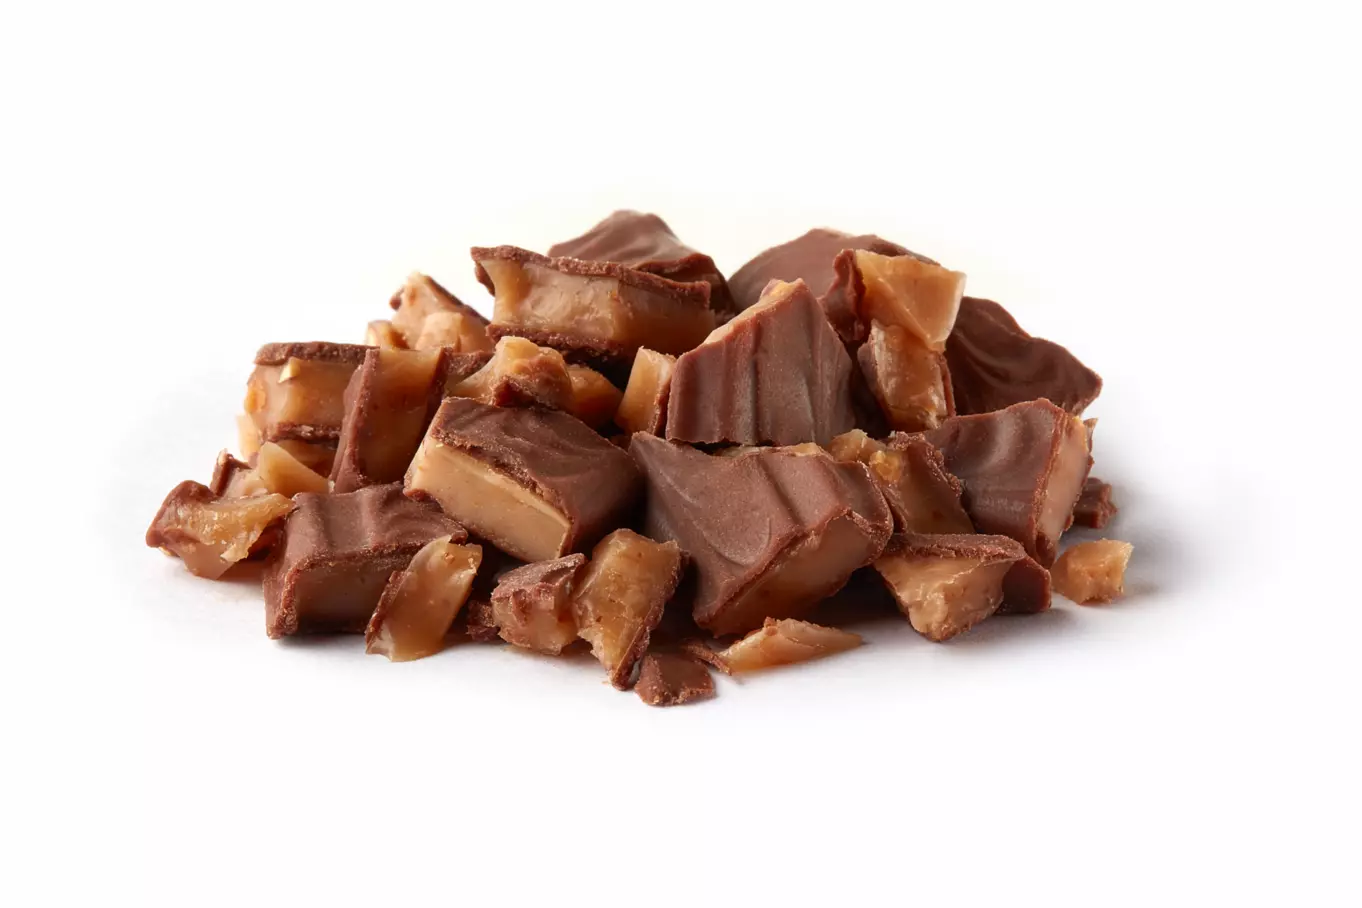 HEATH Milk Chocolate English Toffee Large Grind Chunks, 50 lb box - Second Out of Package Image